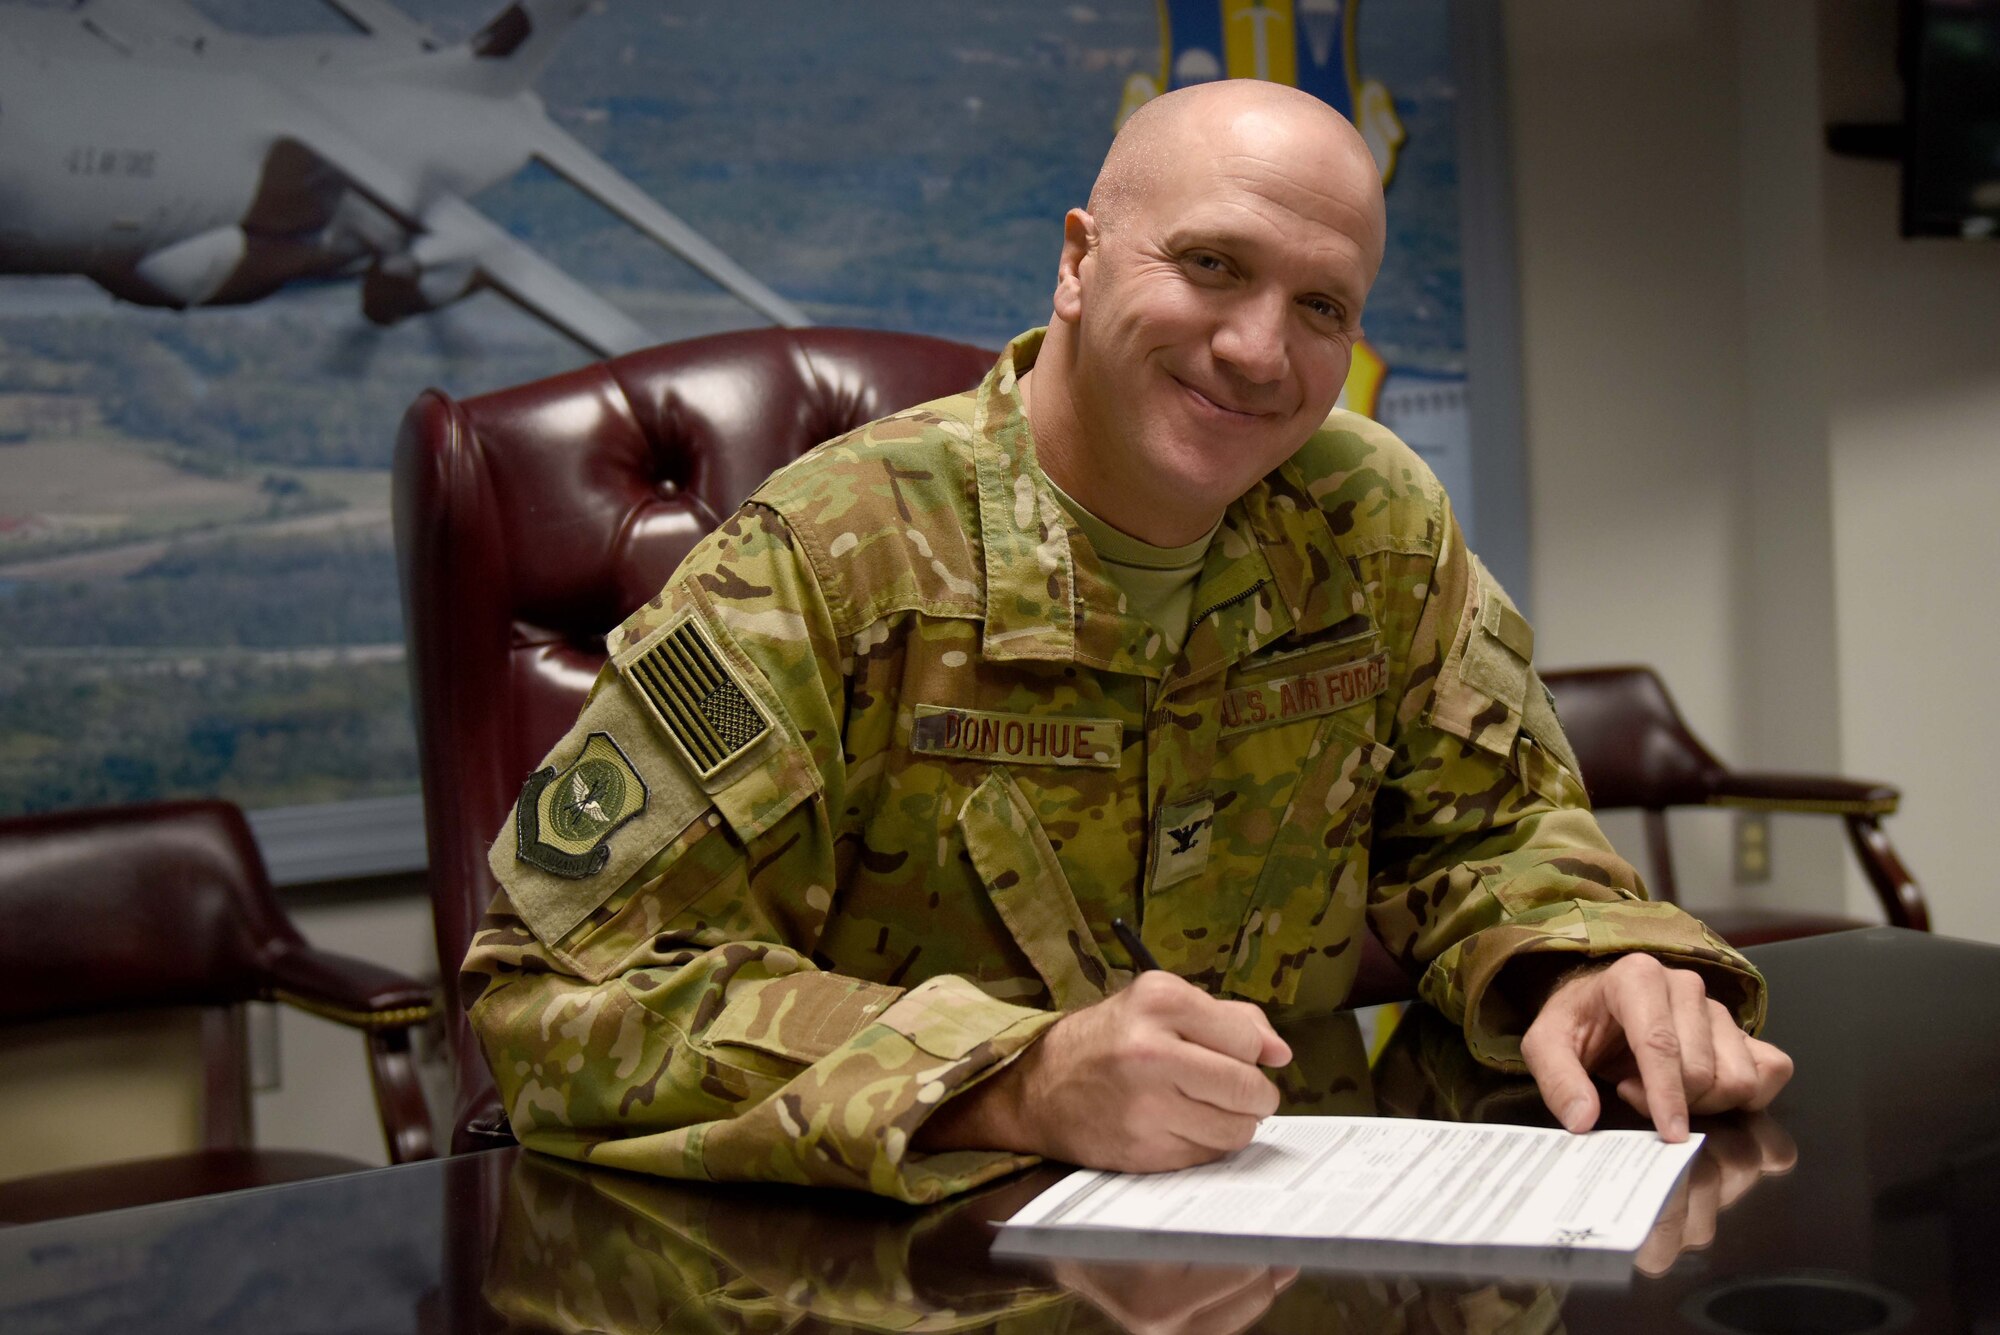 A man wearing the operational camouflage pattern uniform while writing on a piece of paper at a desk.